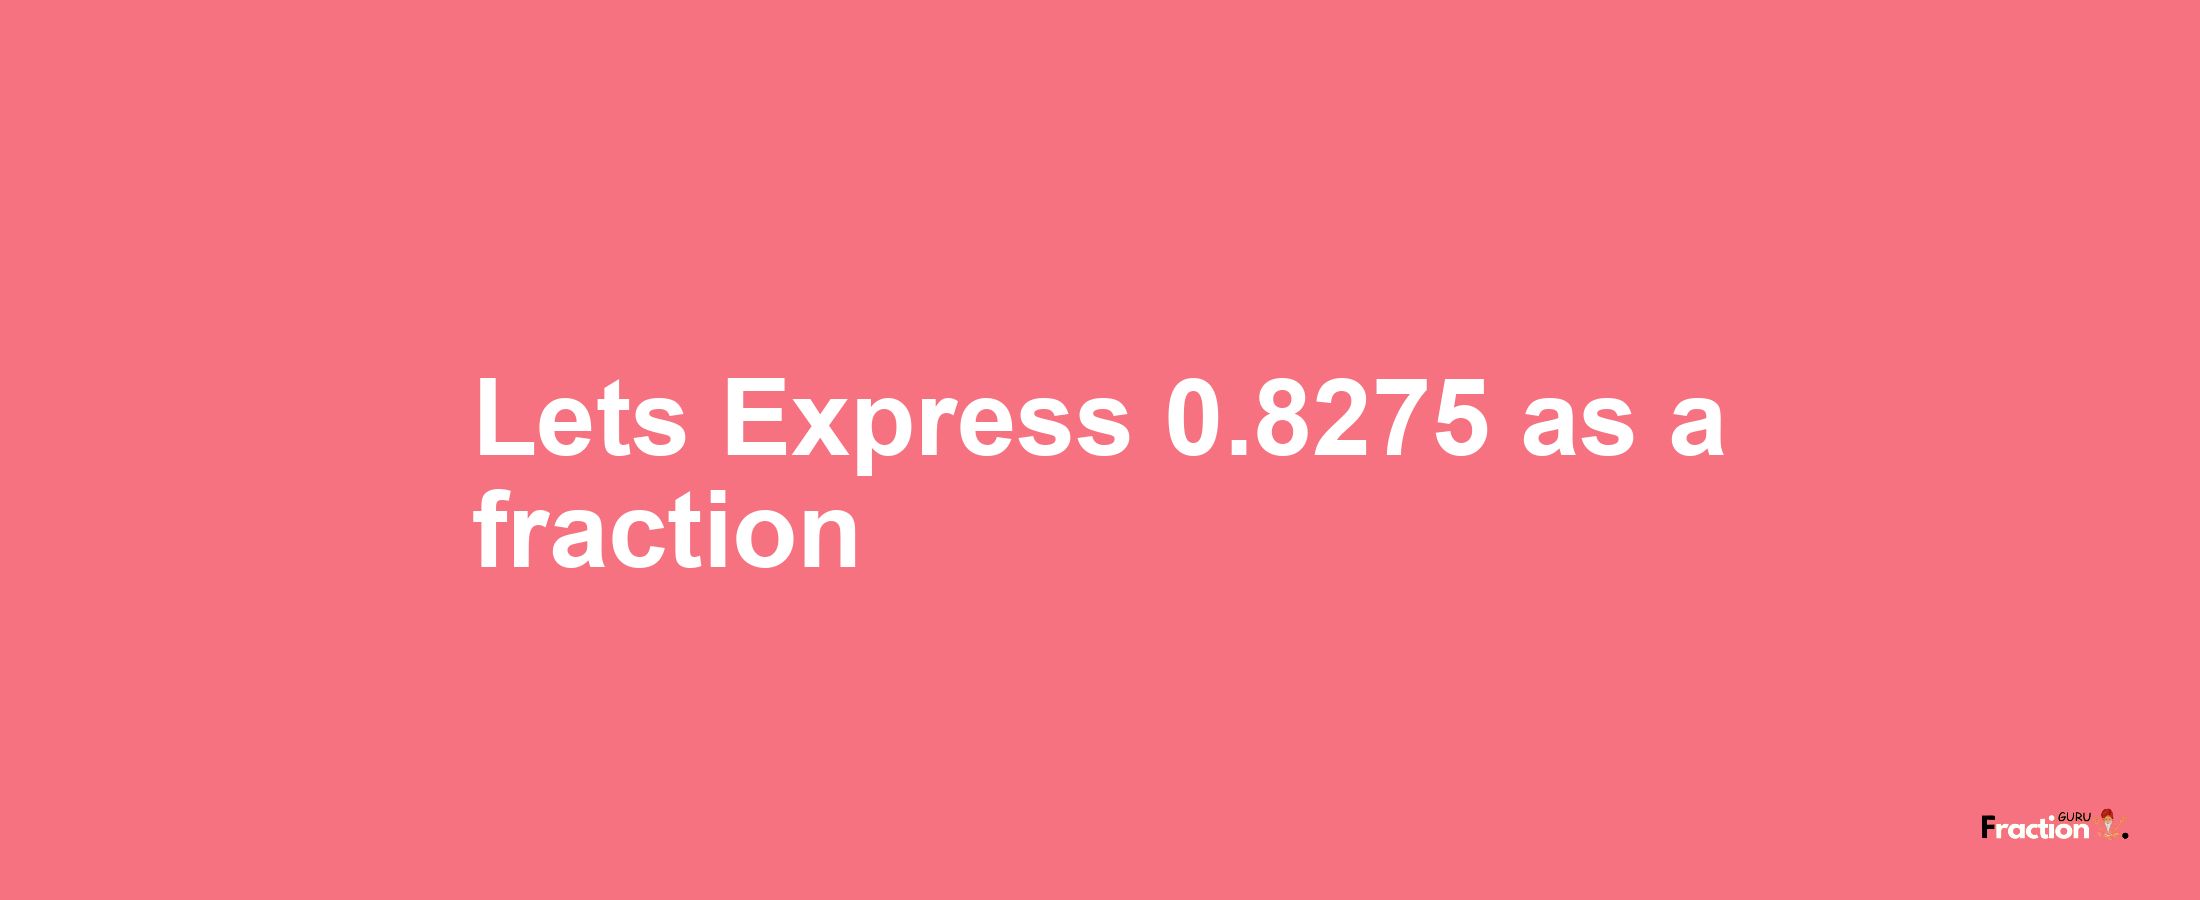 Lets Express 0.8275 as afraction